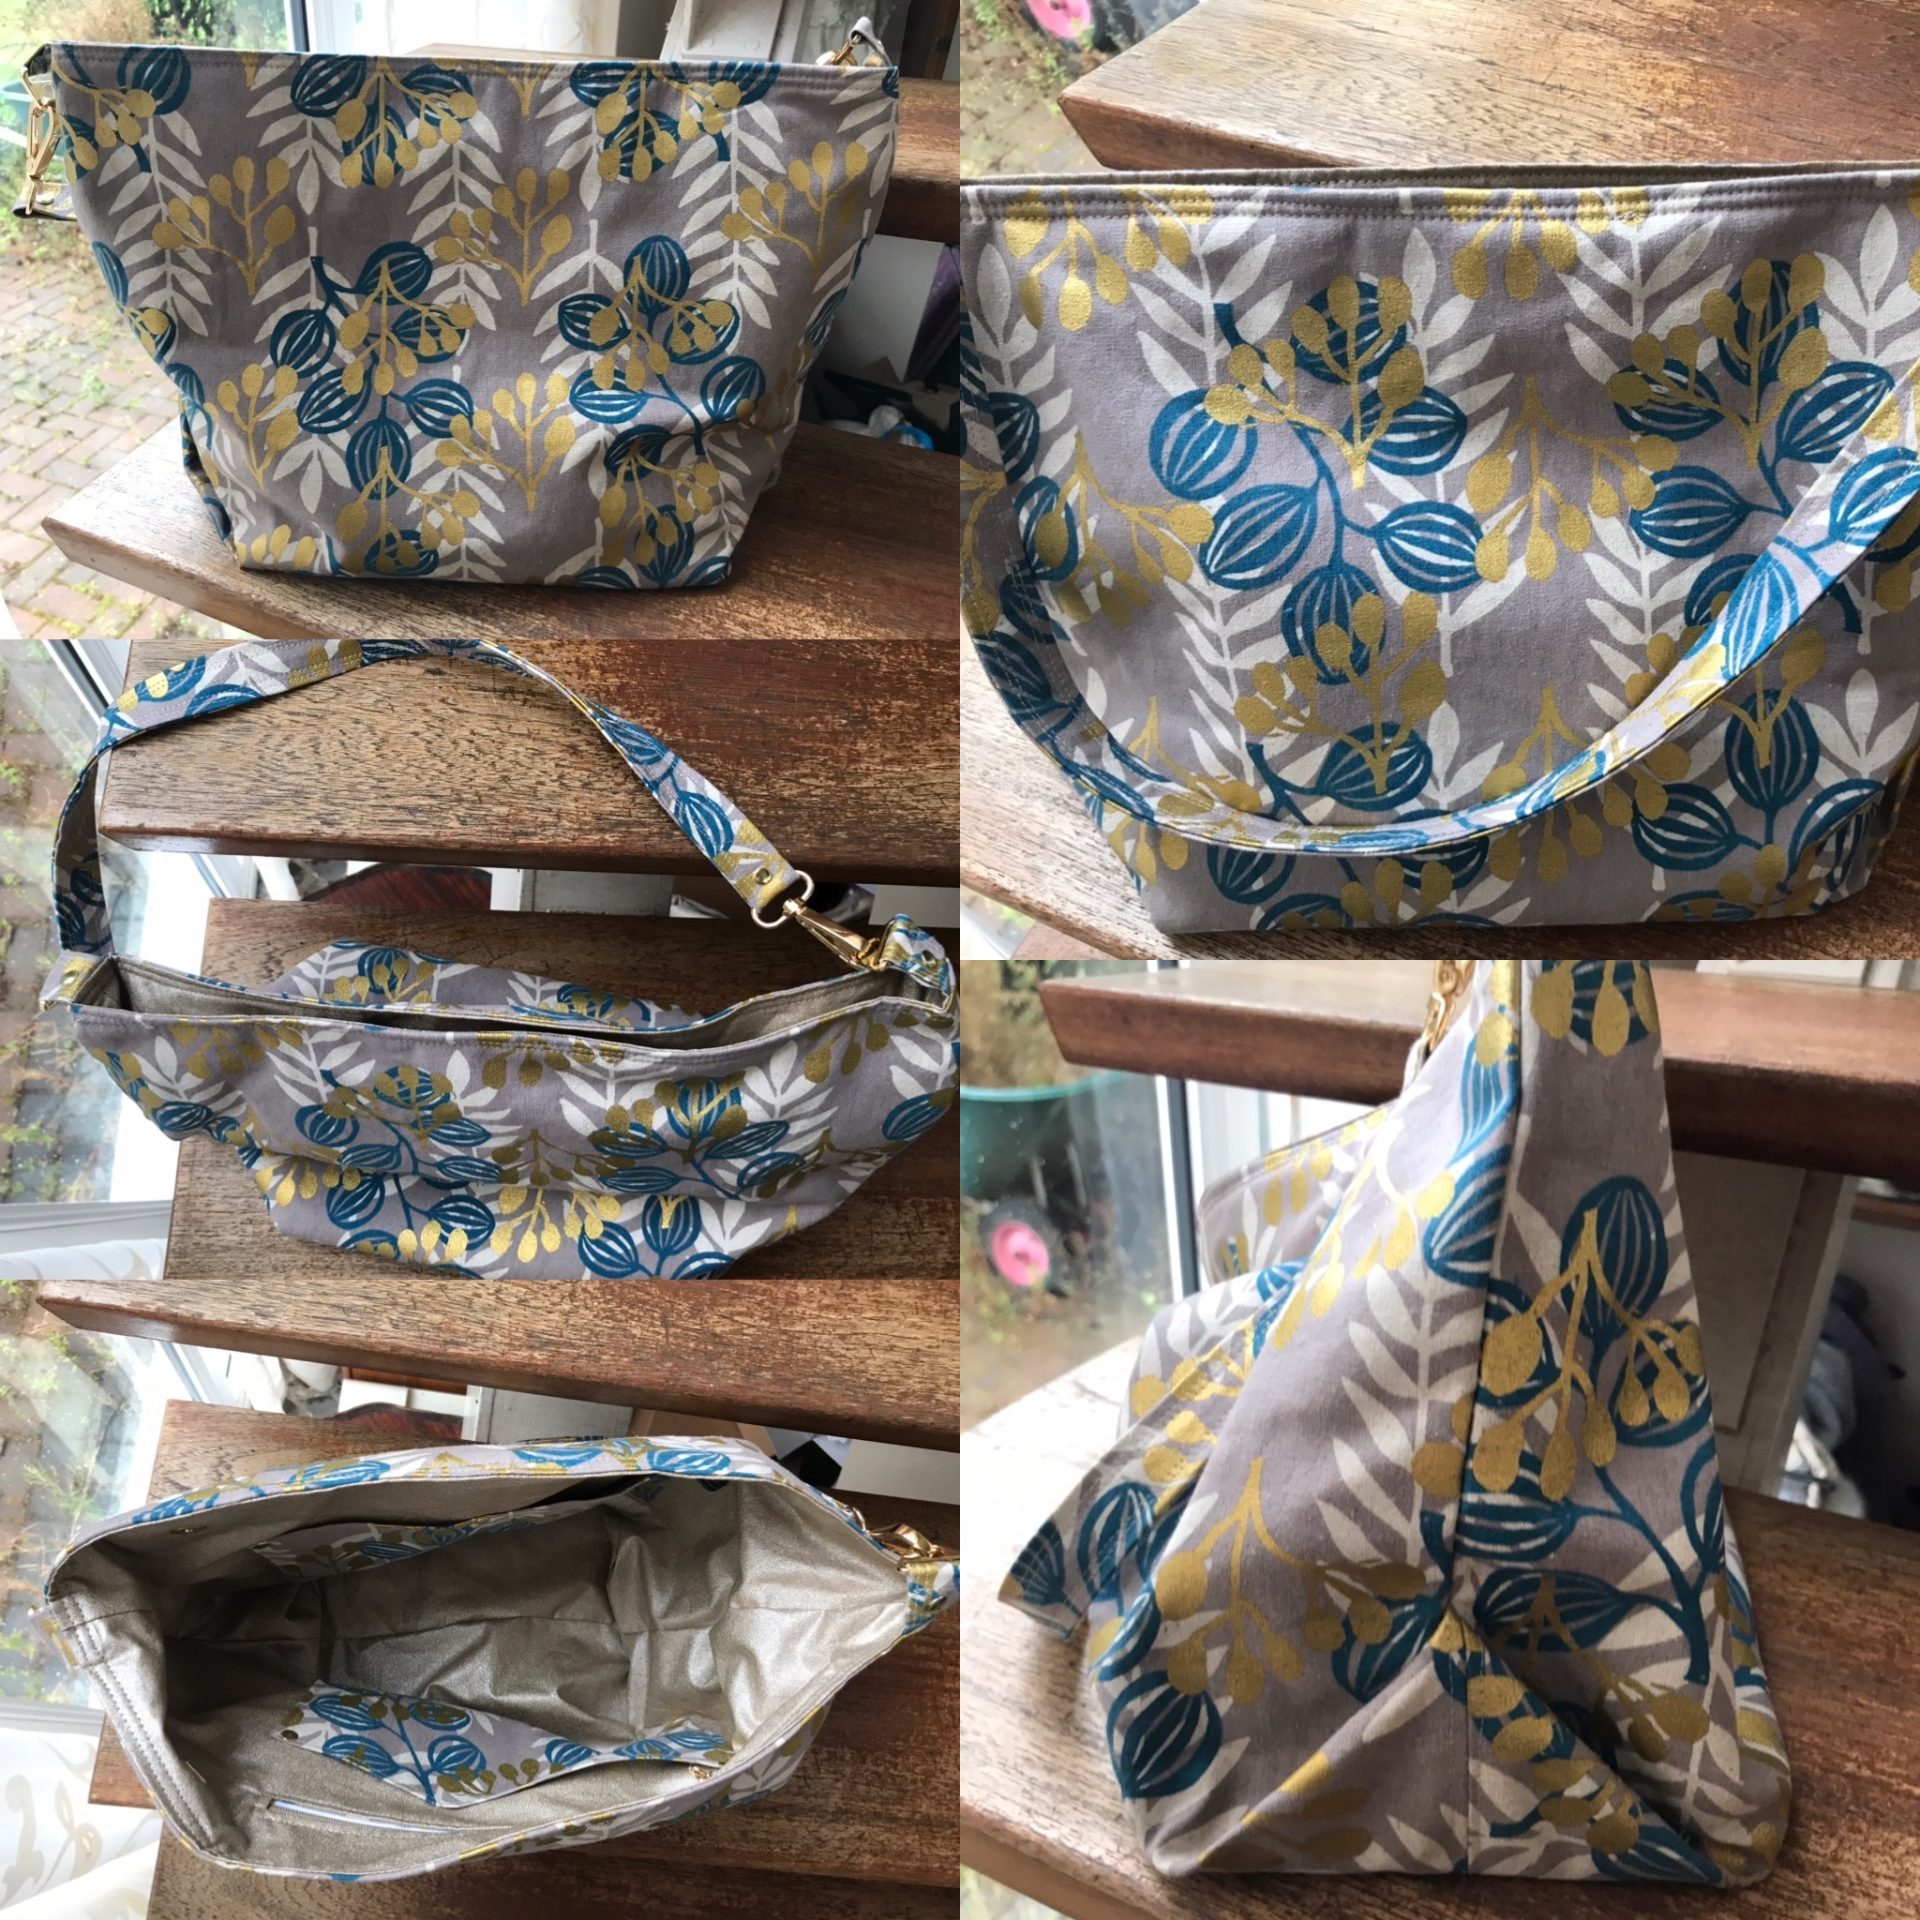 The Cwtsh Bag from Sewing Patterns by Junyuan 
, made by Rebecca Sumnall